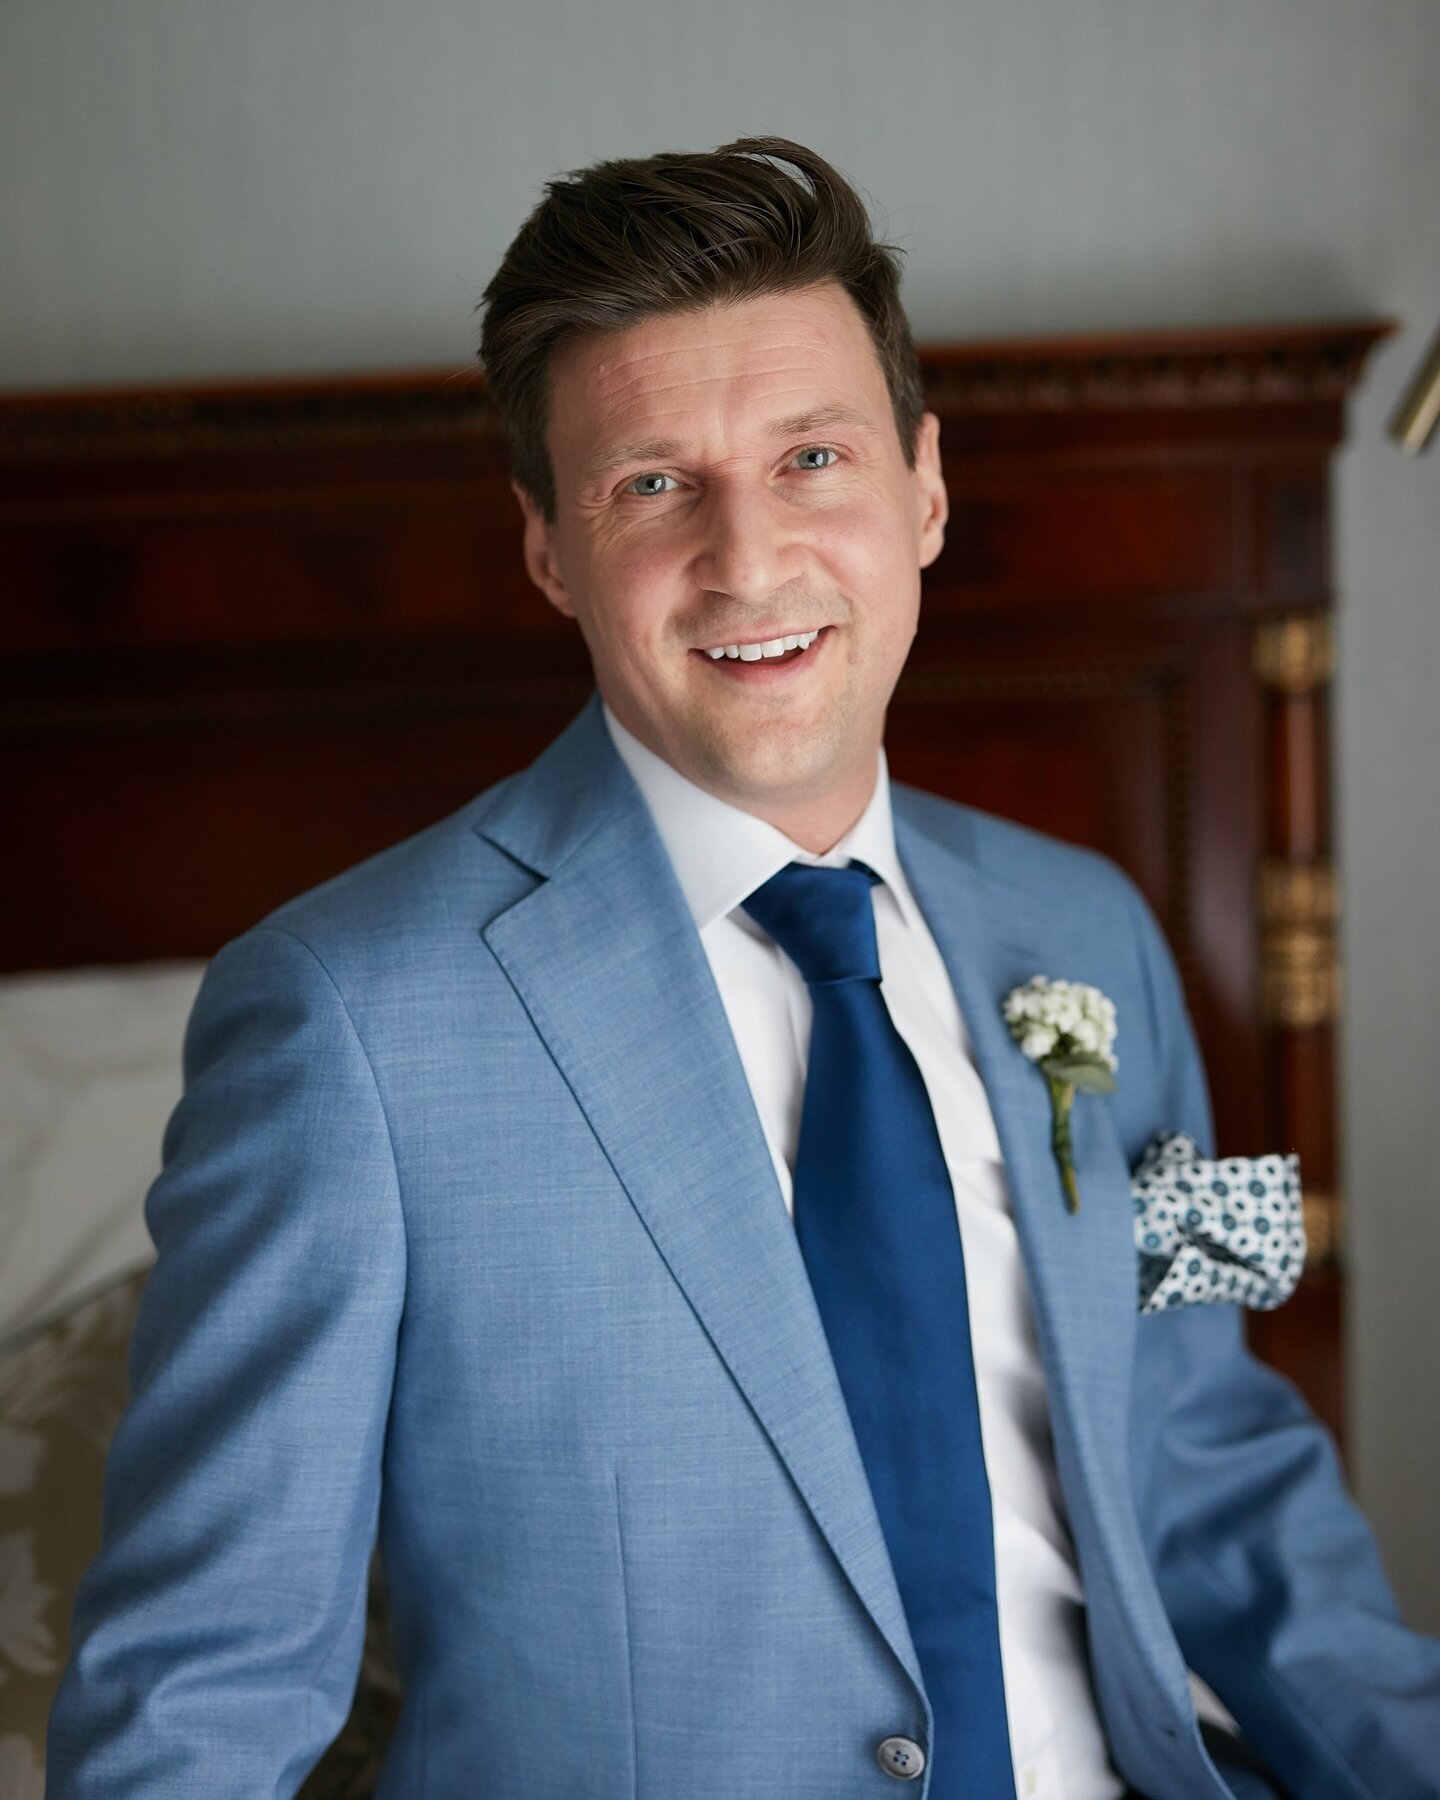 Handsome Carlo. Right before he was wed. I love the absolute happiness in his face.

#dublinwedding #dublinweddingphotographer #irishwedding #dublincitywedding #irishweddingphotographer